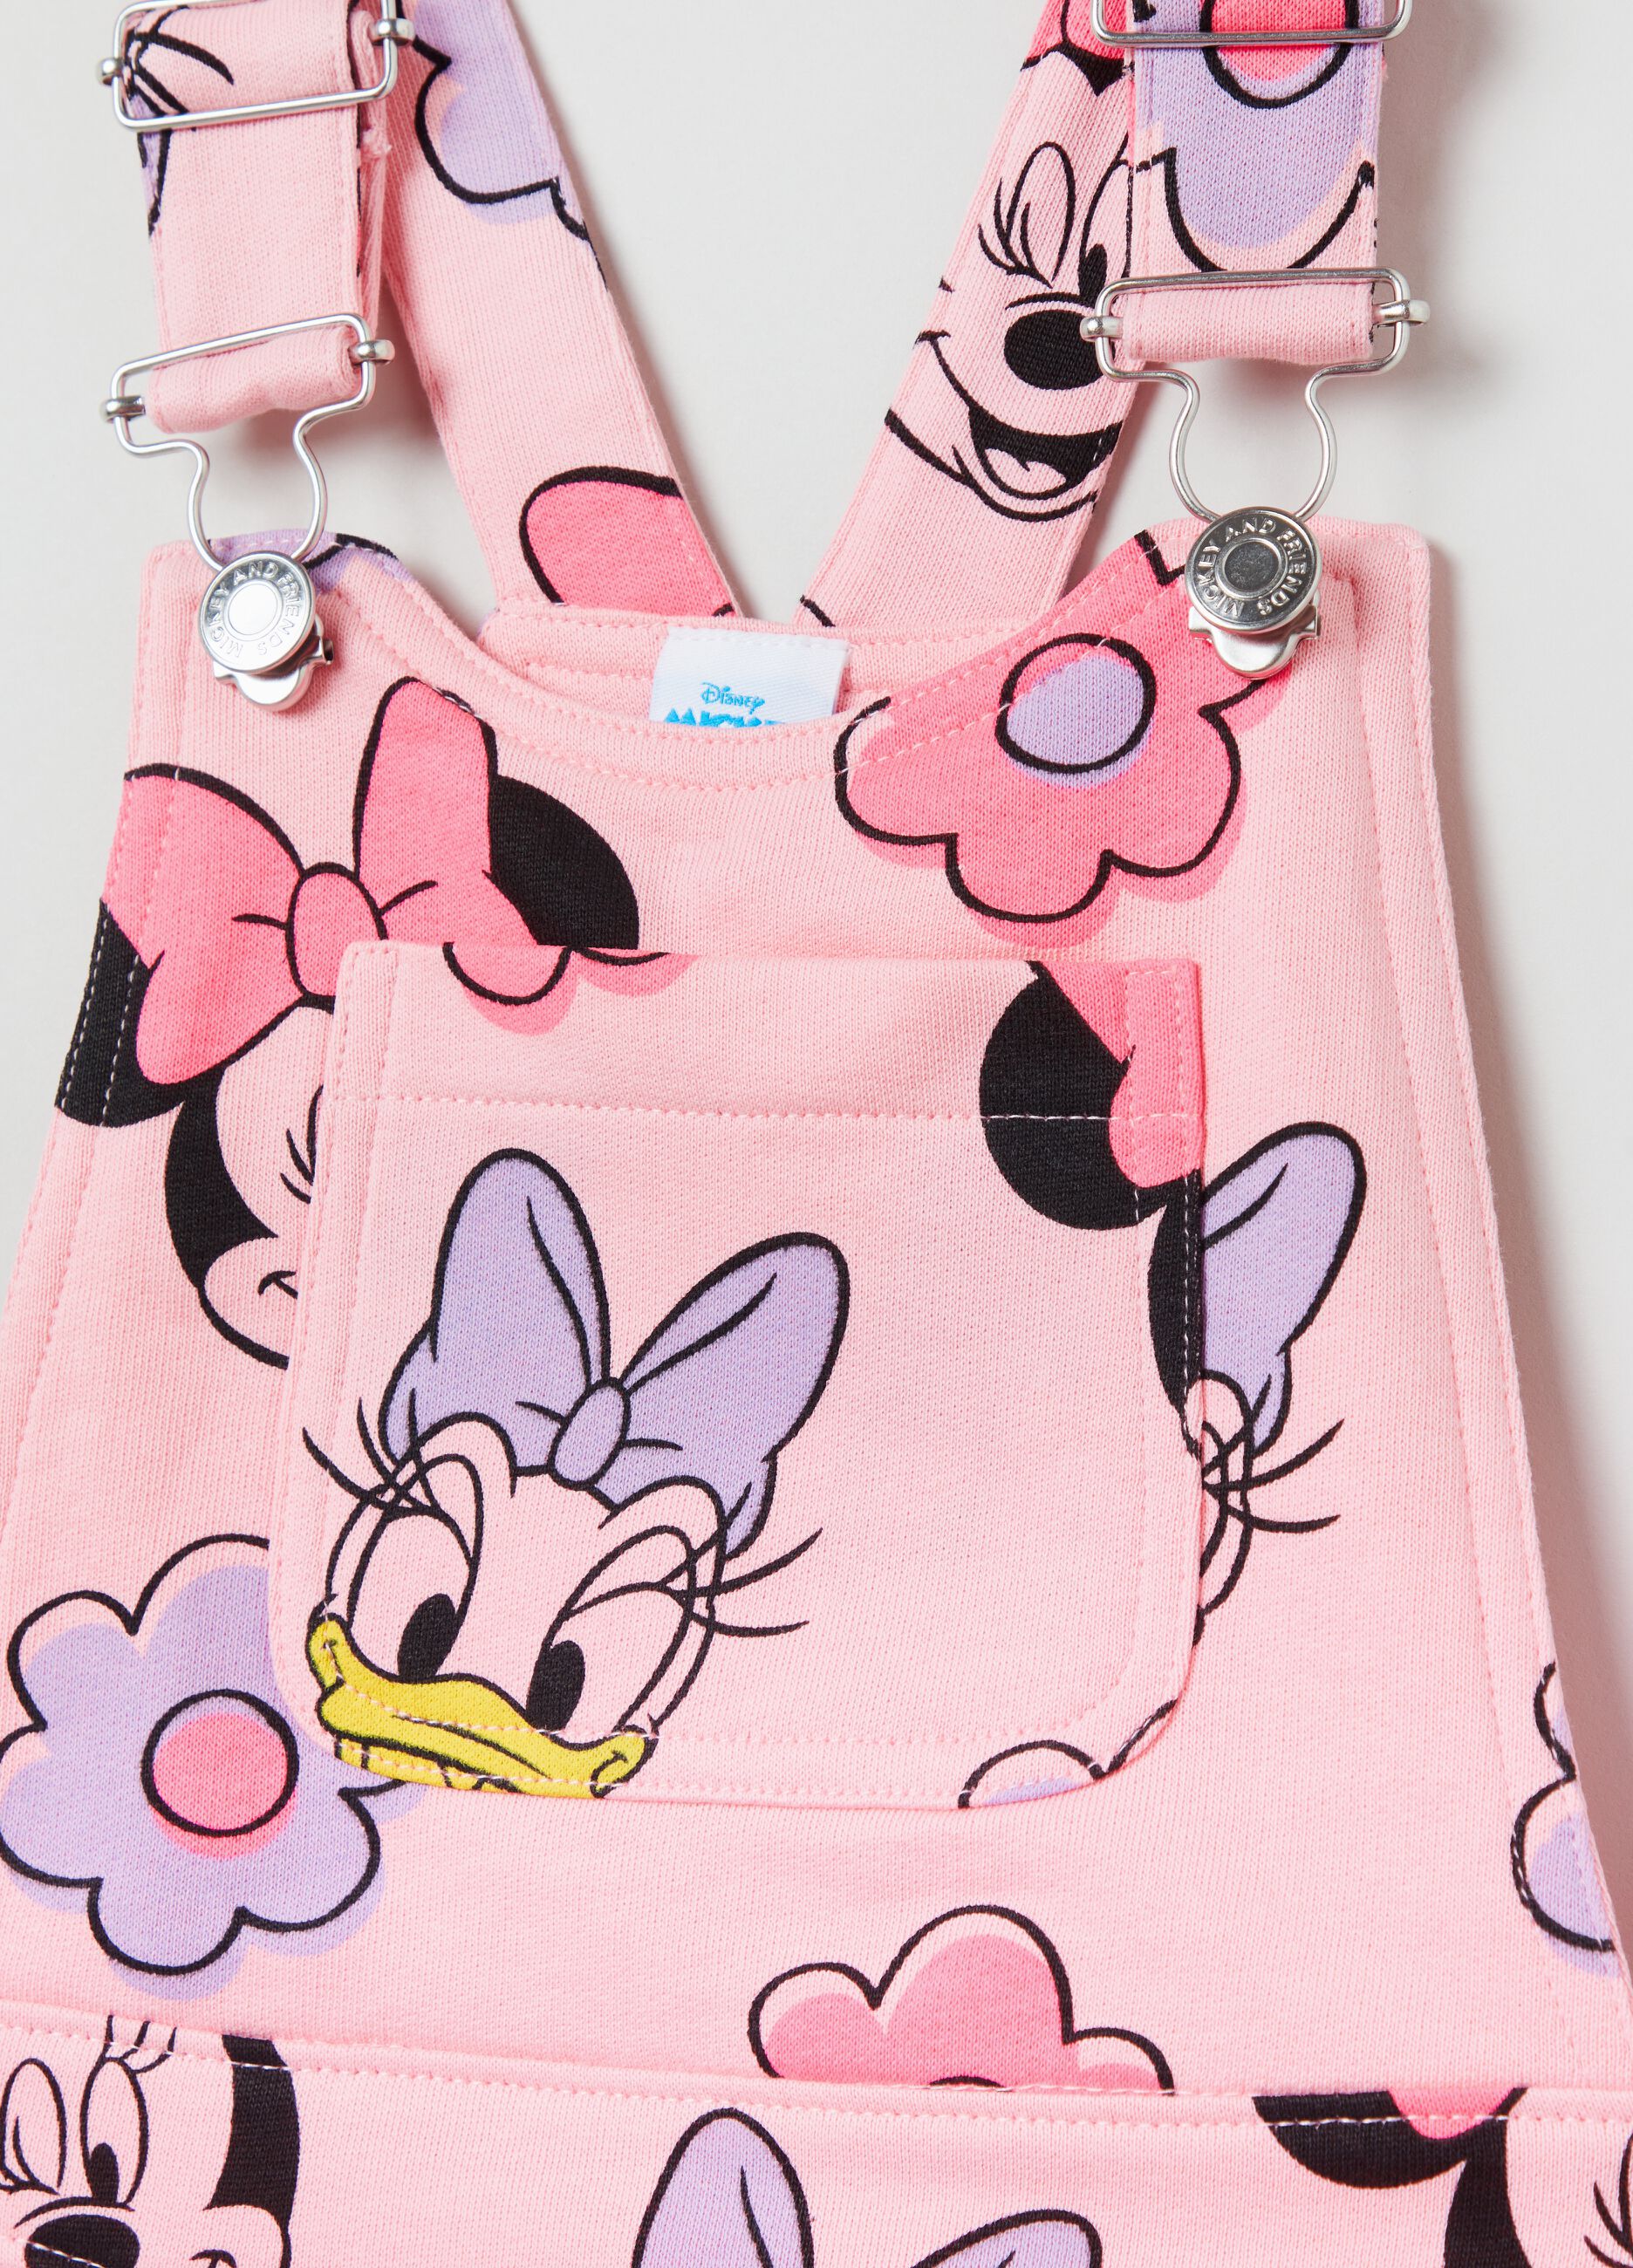 Disney Minnie Mouse and Daisy Duck pinafore